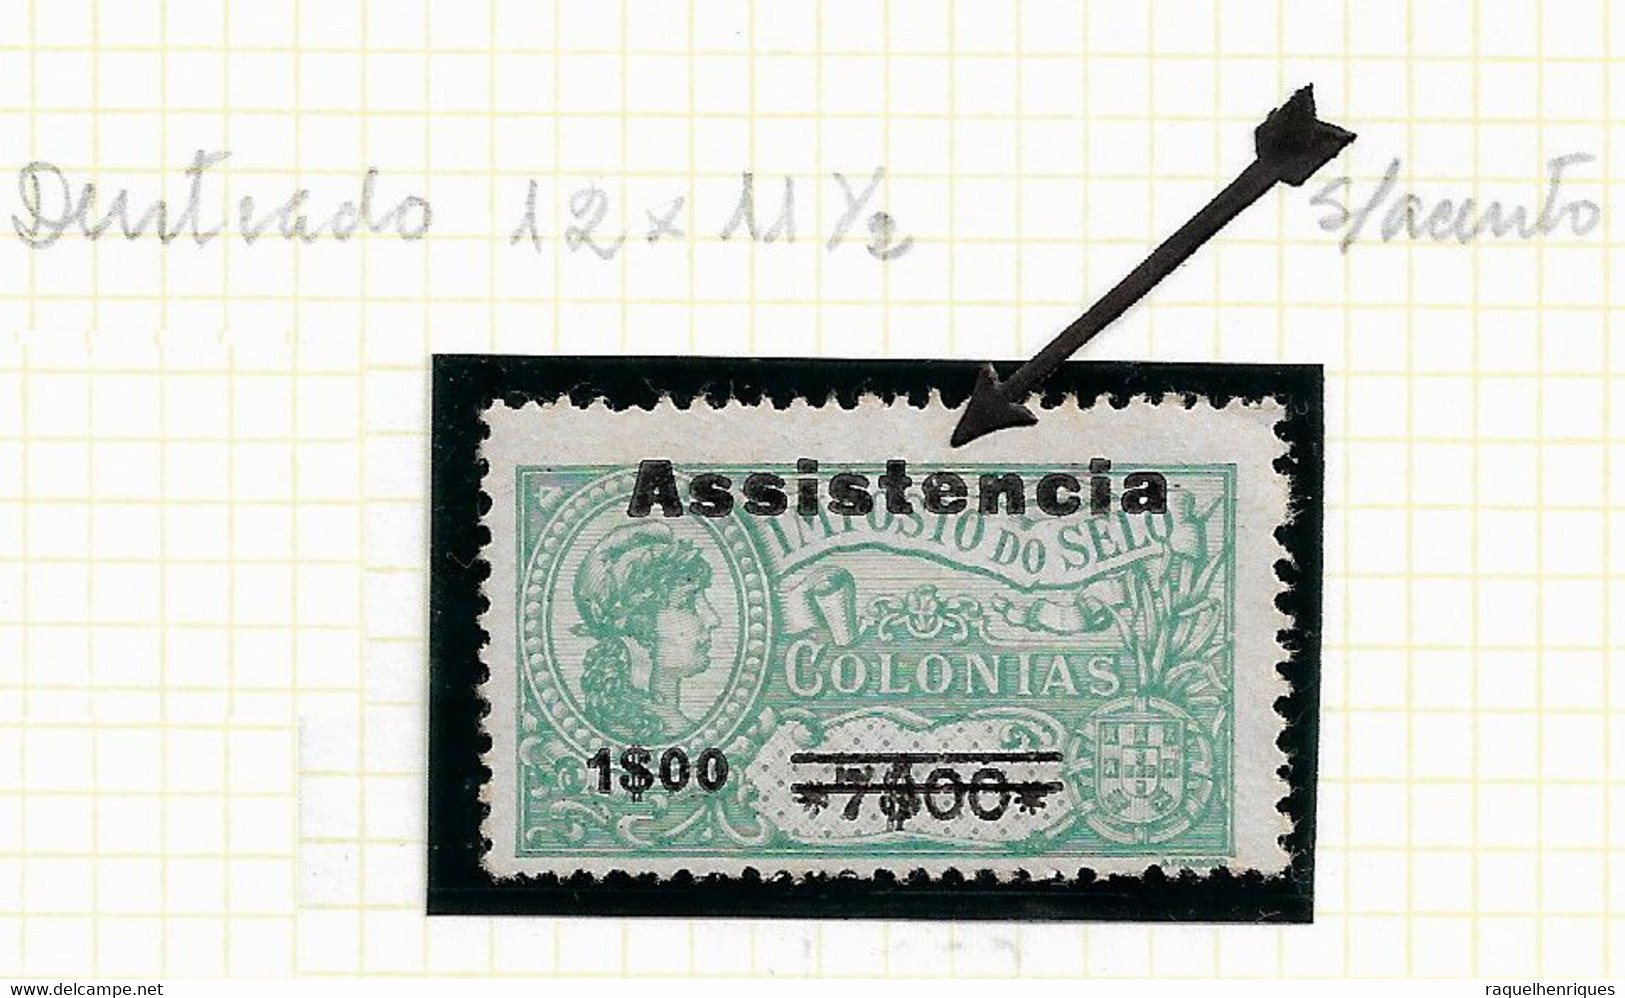 ST. THOMAS And PRINCE STAMP - 1946 Tax Stamps Overprinted "Assistência" & Surcharged Md#9 MH (LSTM#86) - Portuguese Guinea